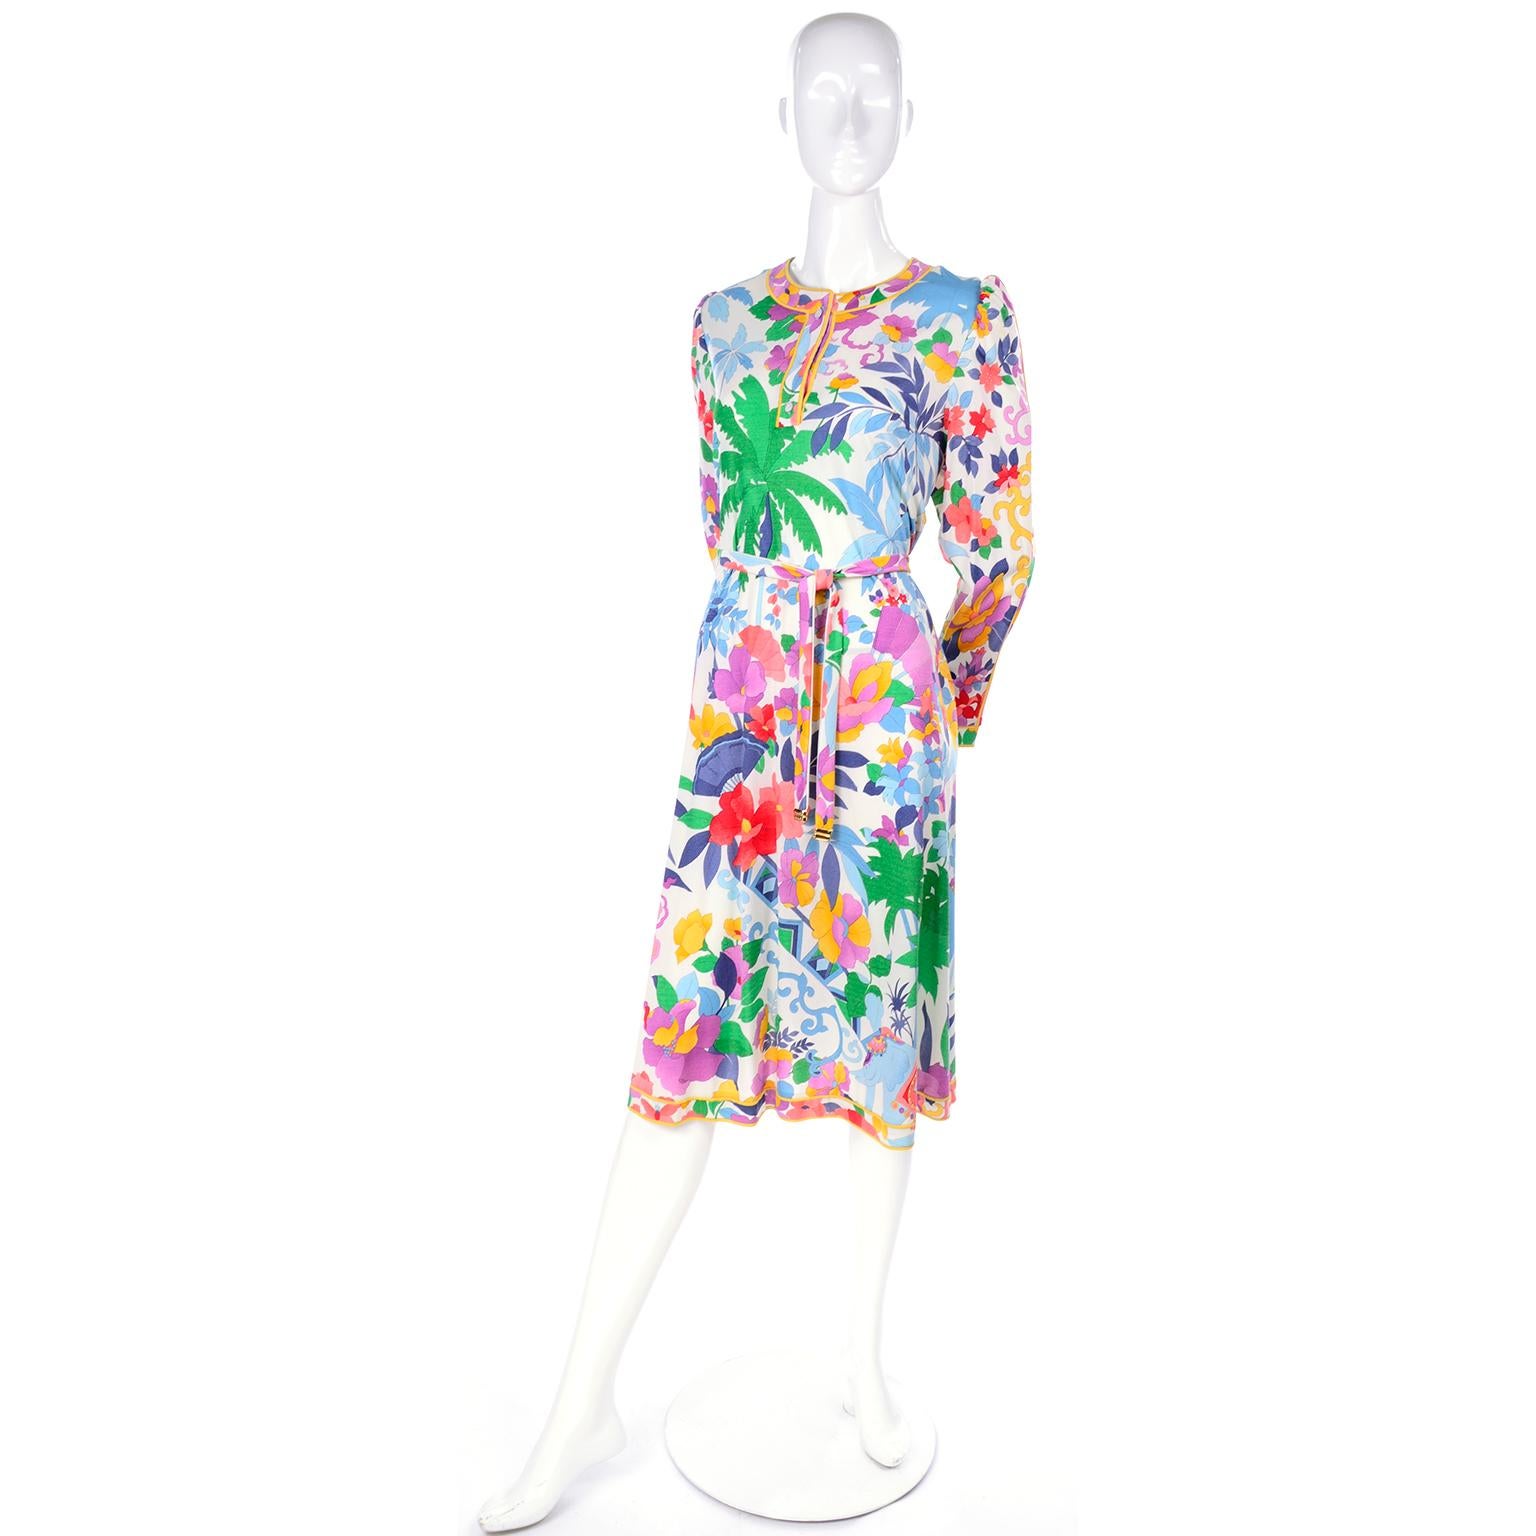 This is a gorgeous silk jersey vintage Leonard Studio dress with a signature floral print mixed with palm trees, elephants, pairs of fish and fans! It has long sleeves and has three buttons down the front, but the closure is a back zipper. It fits